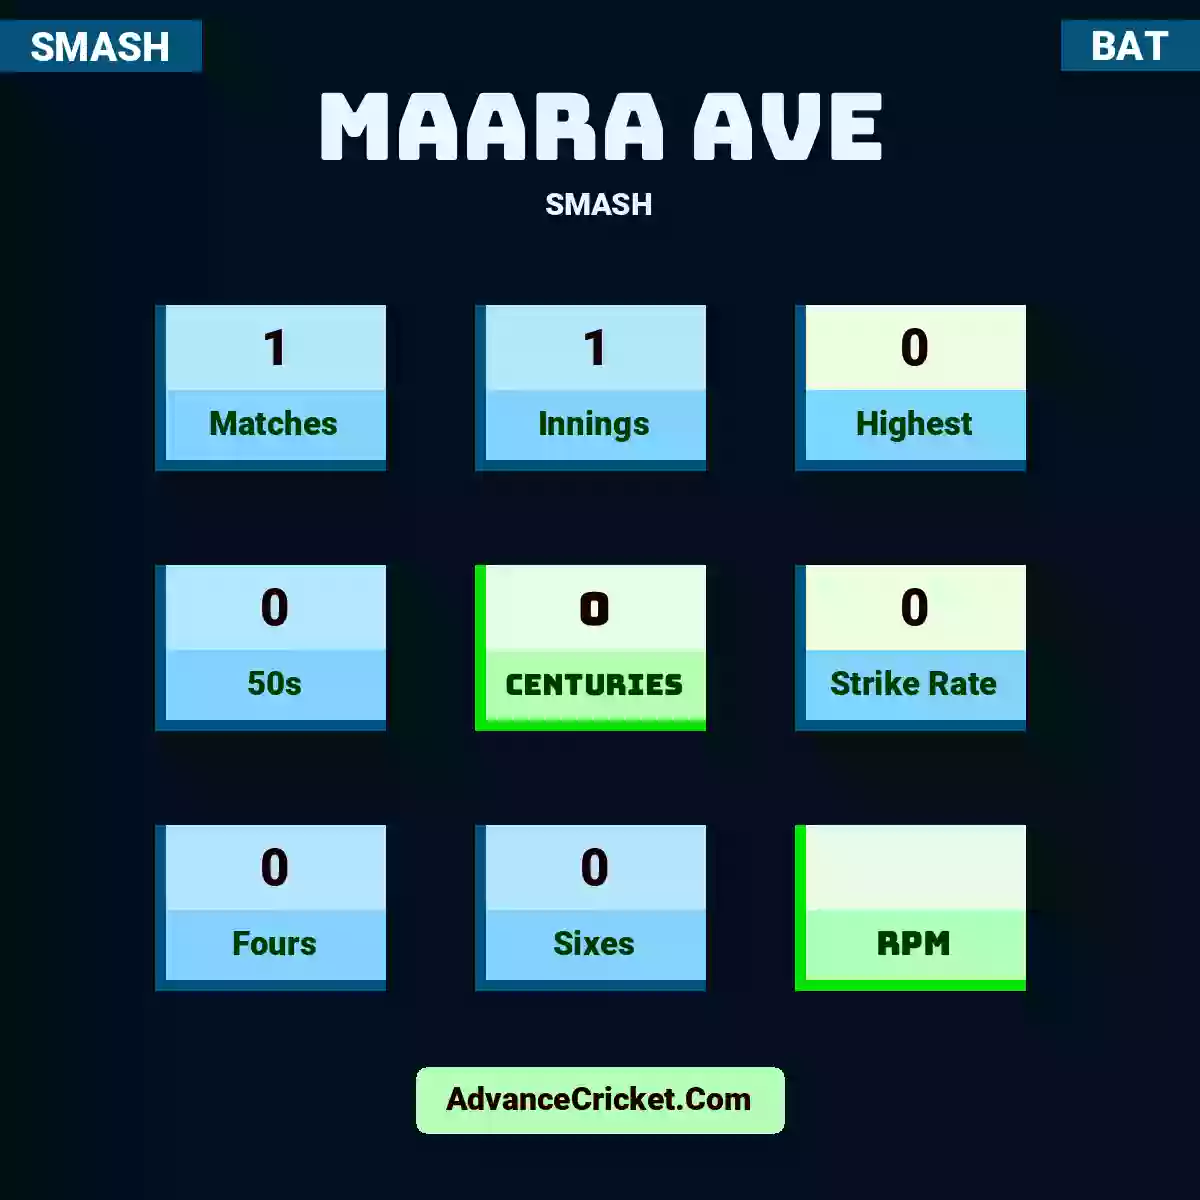 Maara Ave SMASH , Maara Ave played 1 matches, scored 0 runs as highest, 0 half-centuries, and 0 centuries, with a strike rate of 0. m.ave hit 0 fours and 0 sixes.